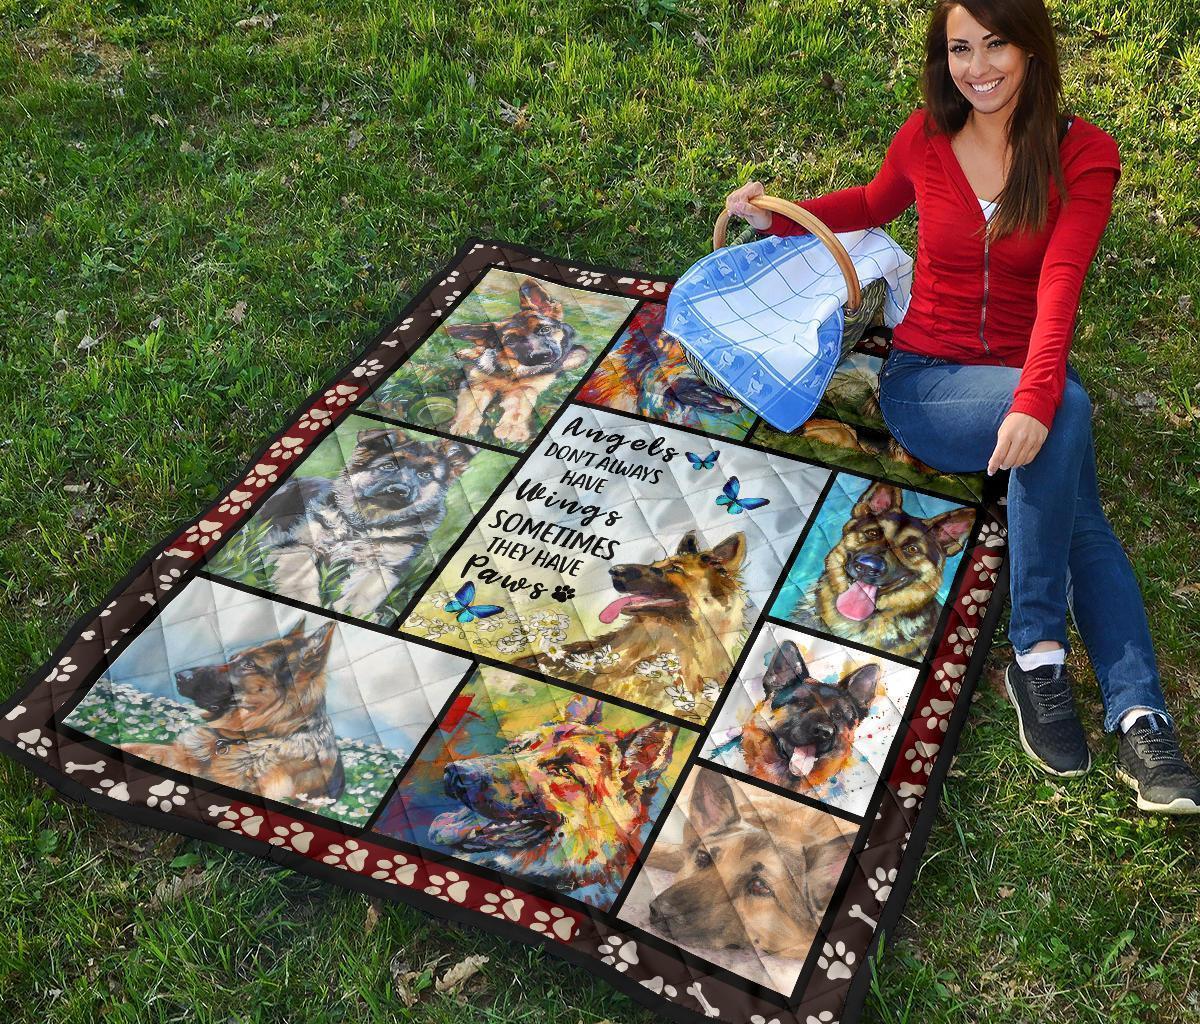 Germand Shepherd Dog Quilt Blanket Angels Sometime Have Paws-Gear Wanta